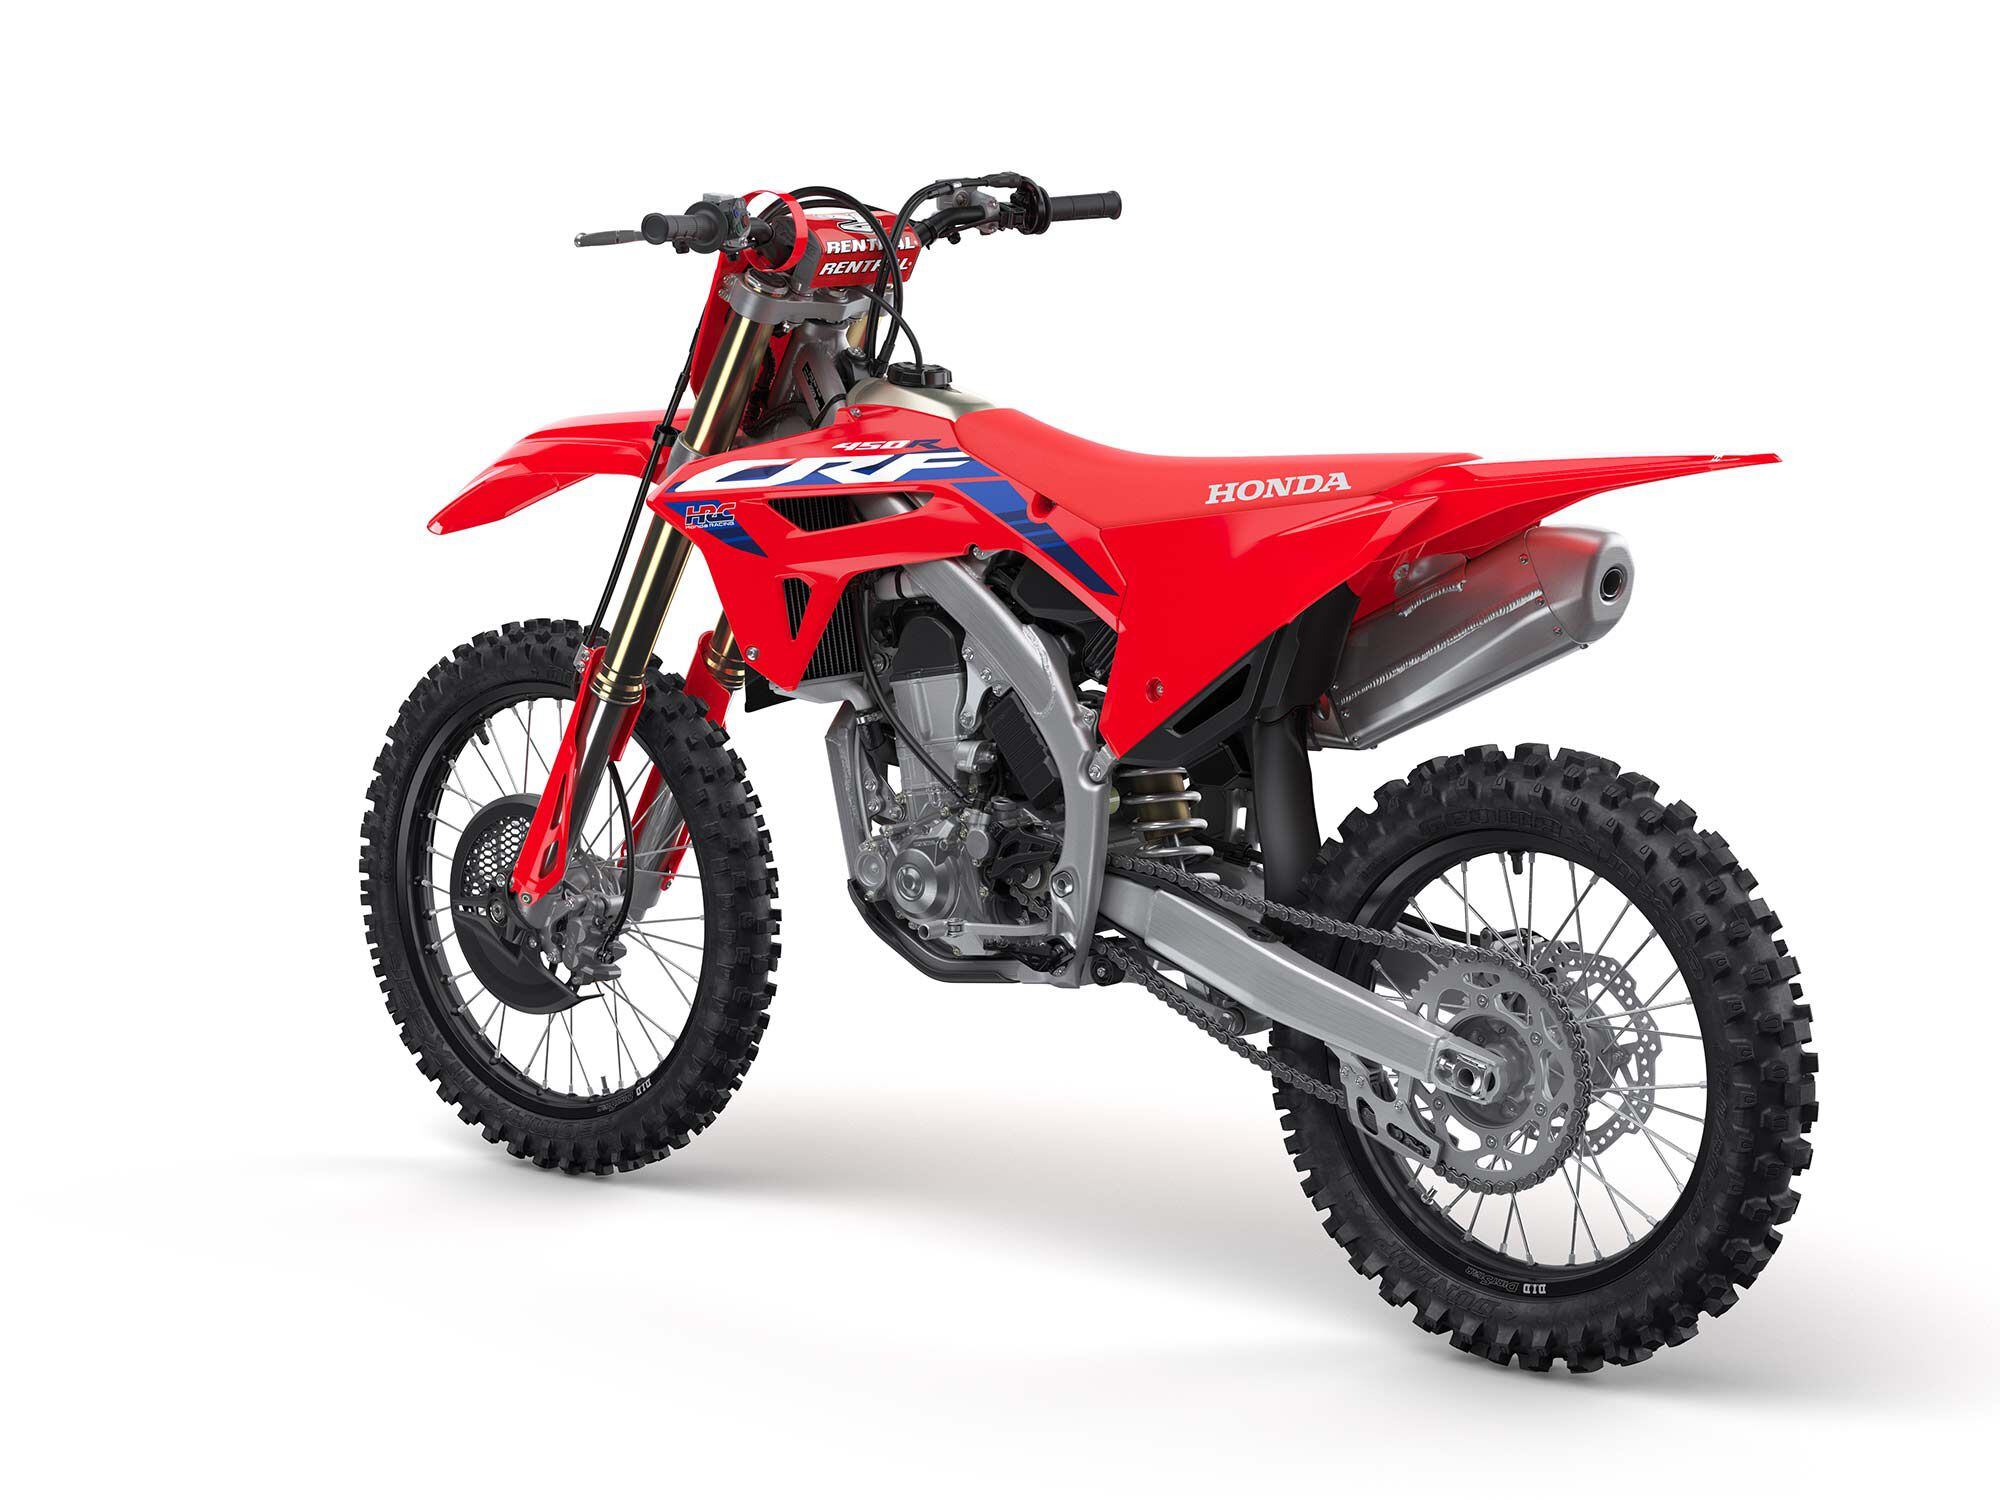 The CRF450R gets a revised swingarm and subframe.